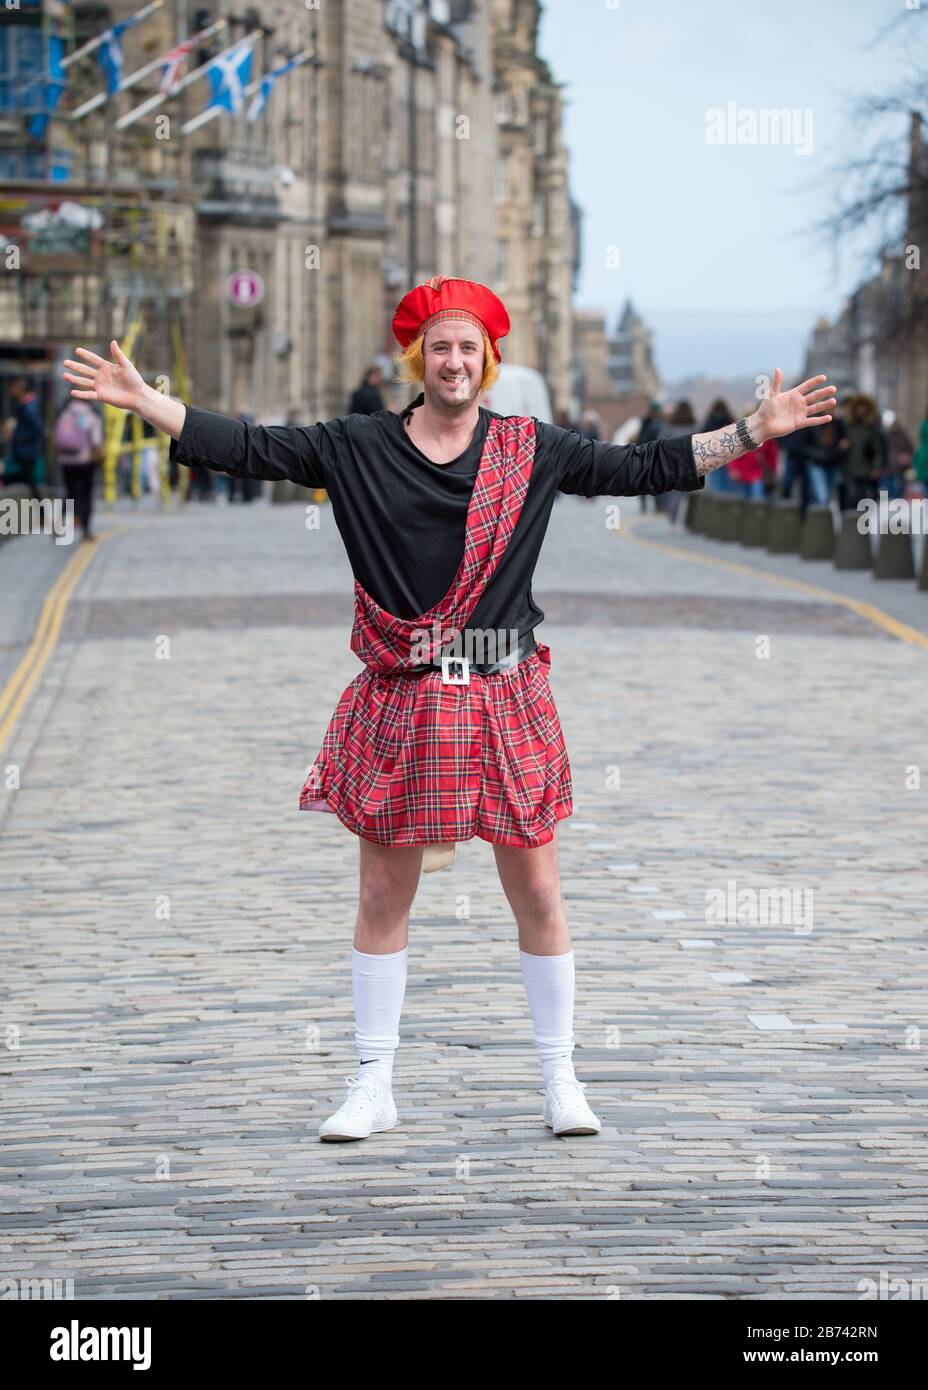 Edinburgh, UK. 13th Mar, 2020. Pictured: Man seen on the Royal Mile in Edinburgh wearing a tartan kilt, tartan plaid and red hat, strutting his stuff for the camera. Credit: Colin Fisher/Alamy Live News Stock Photo